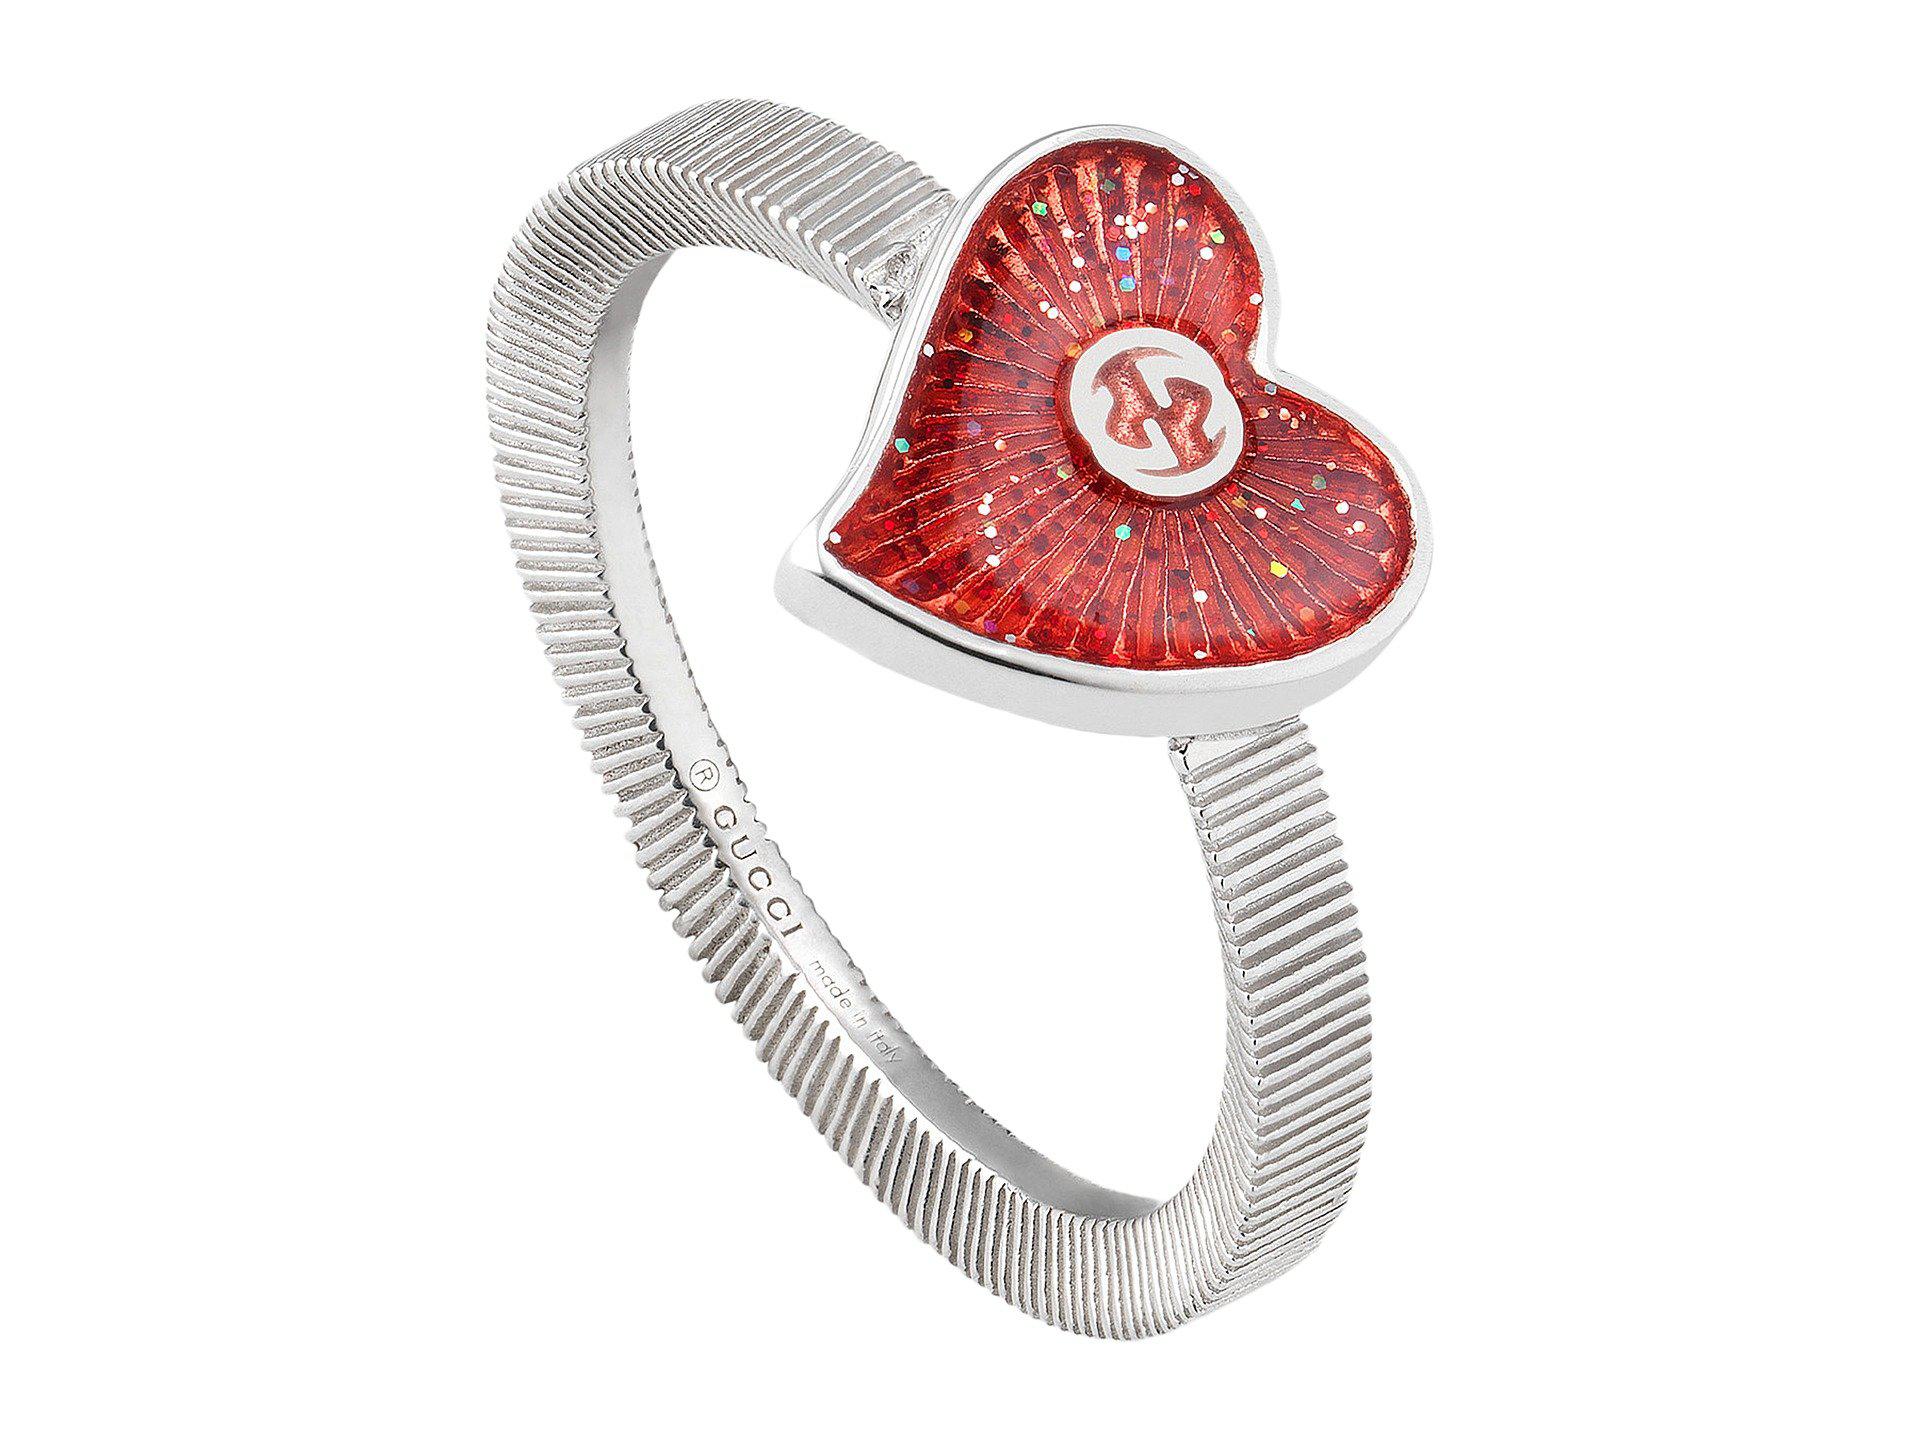 heart ring gucci